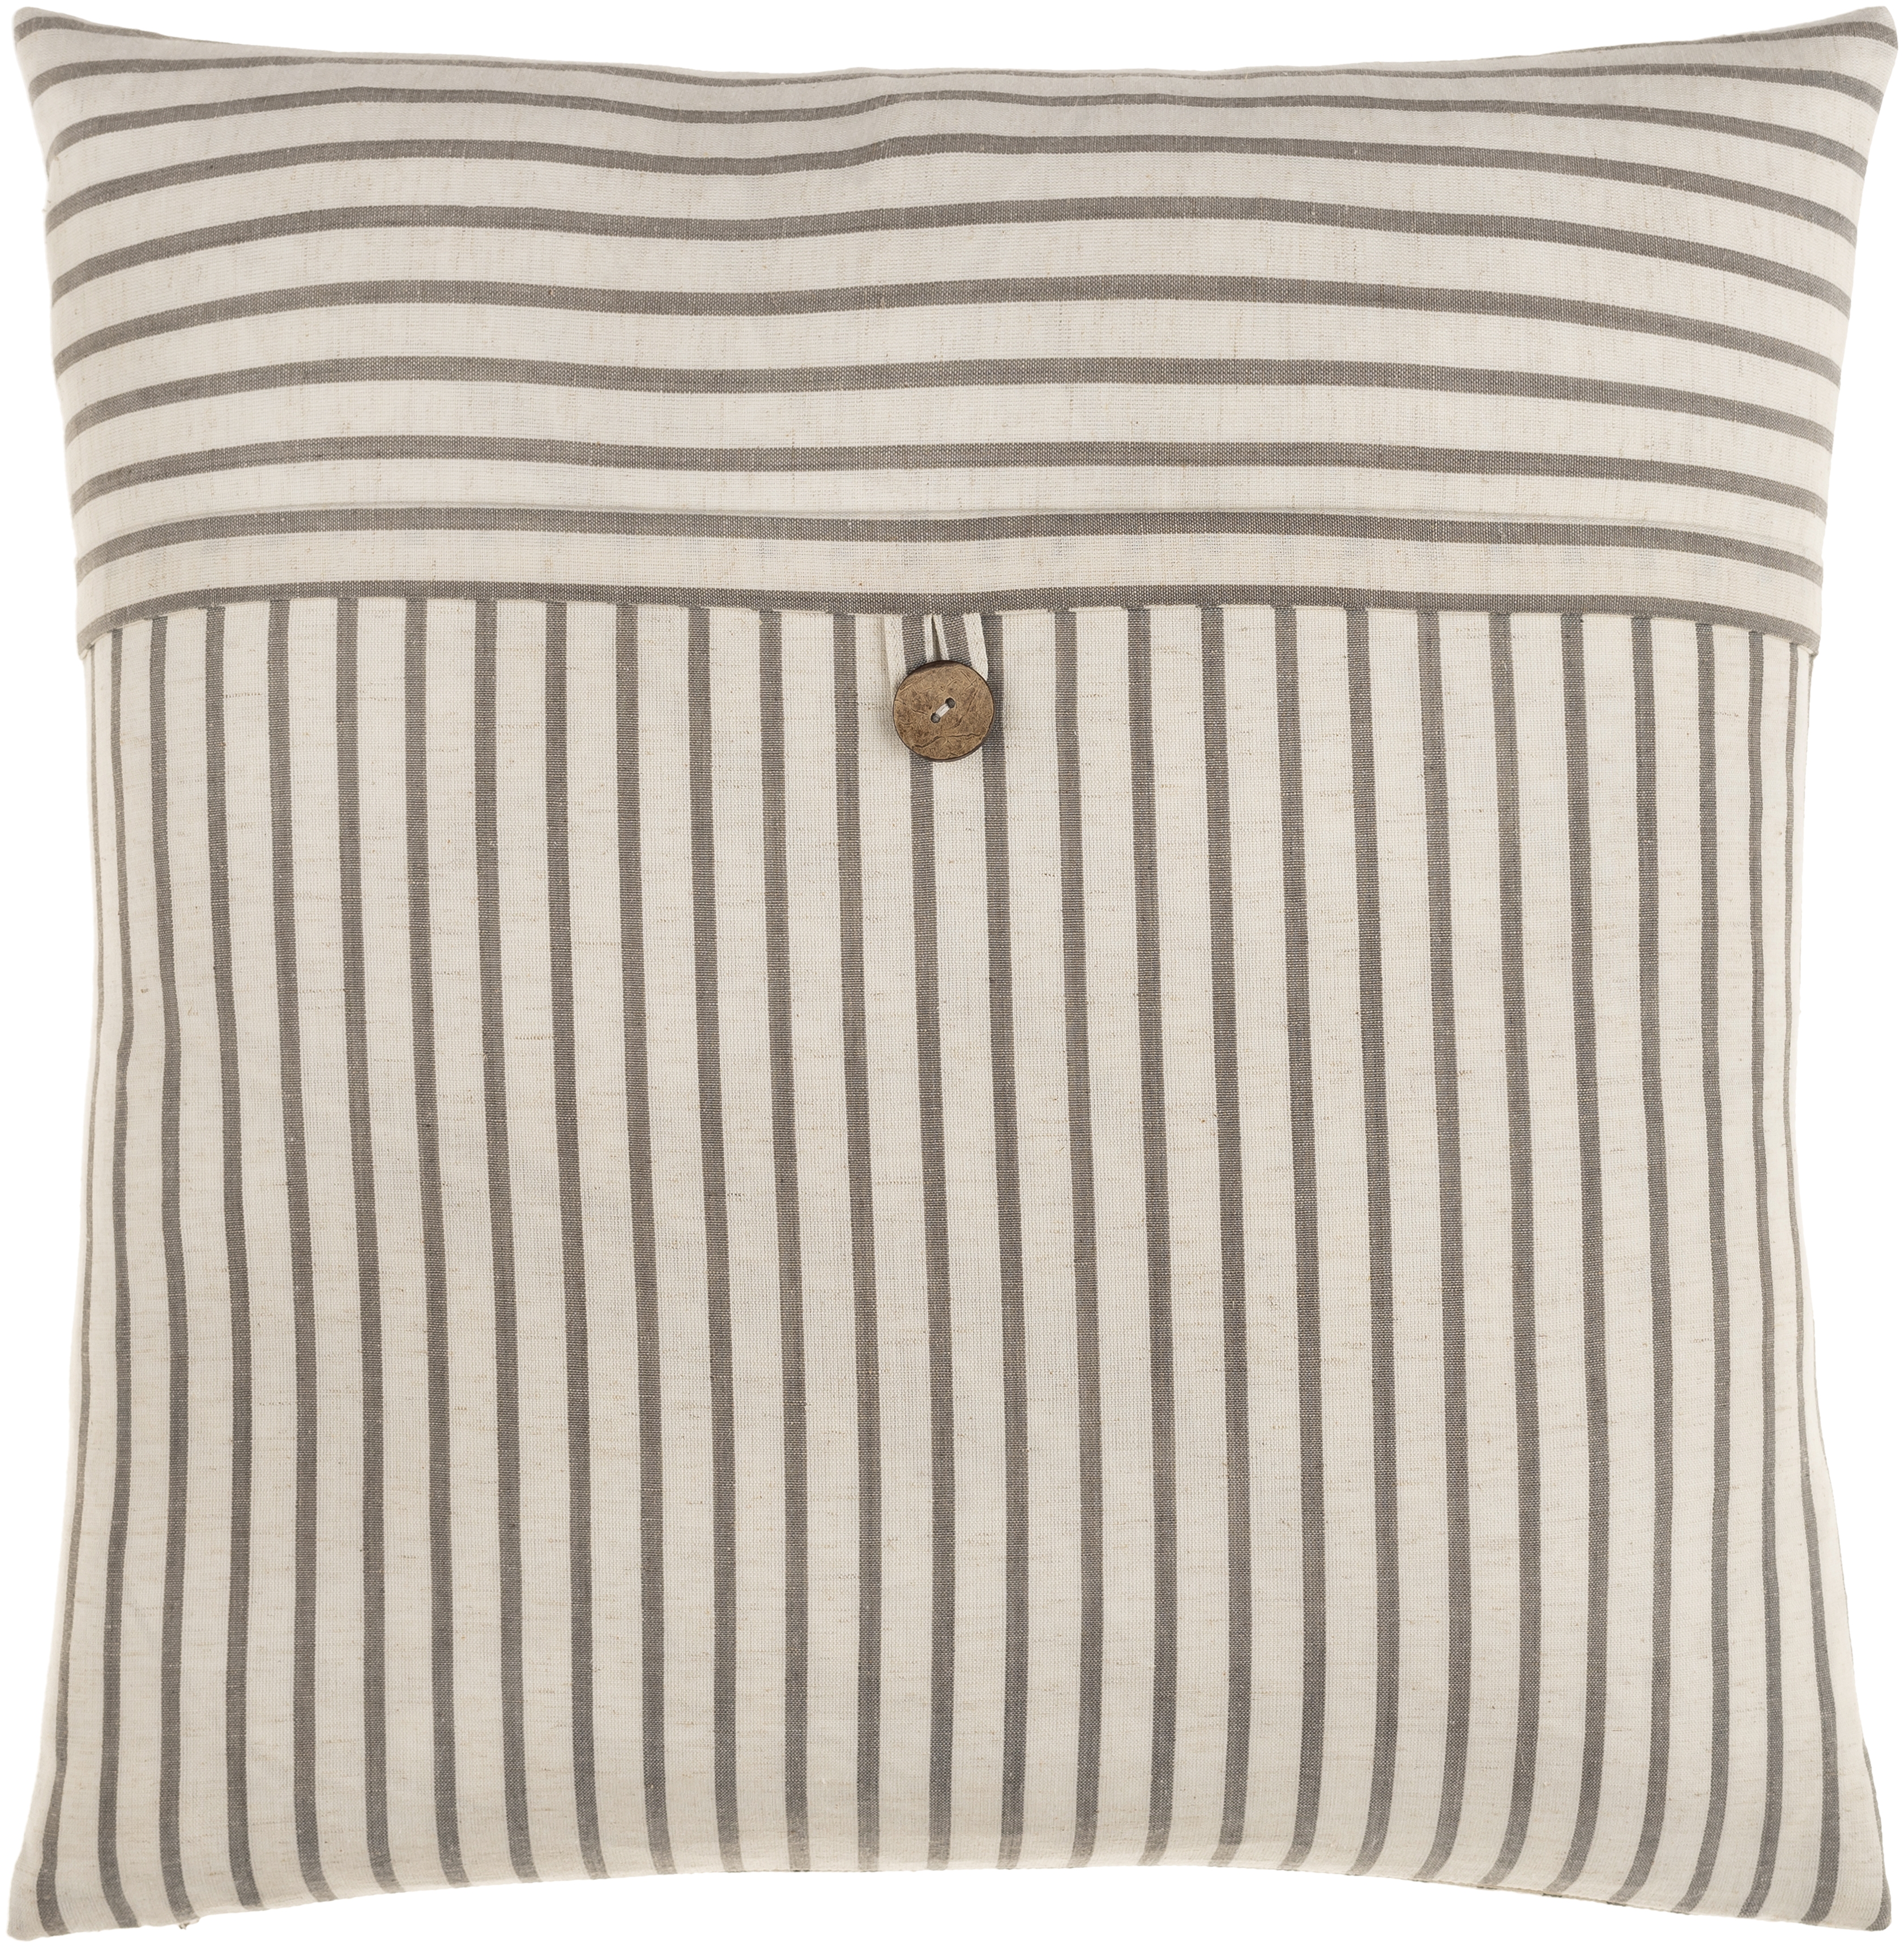 Penelope Stripe Throw Pillow, 20" x 20", with down insert - Image 0